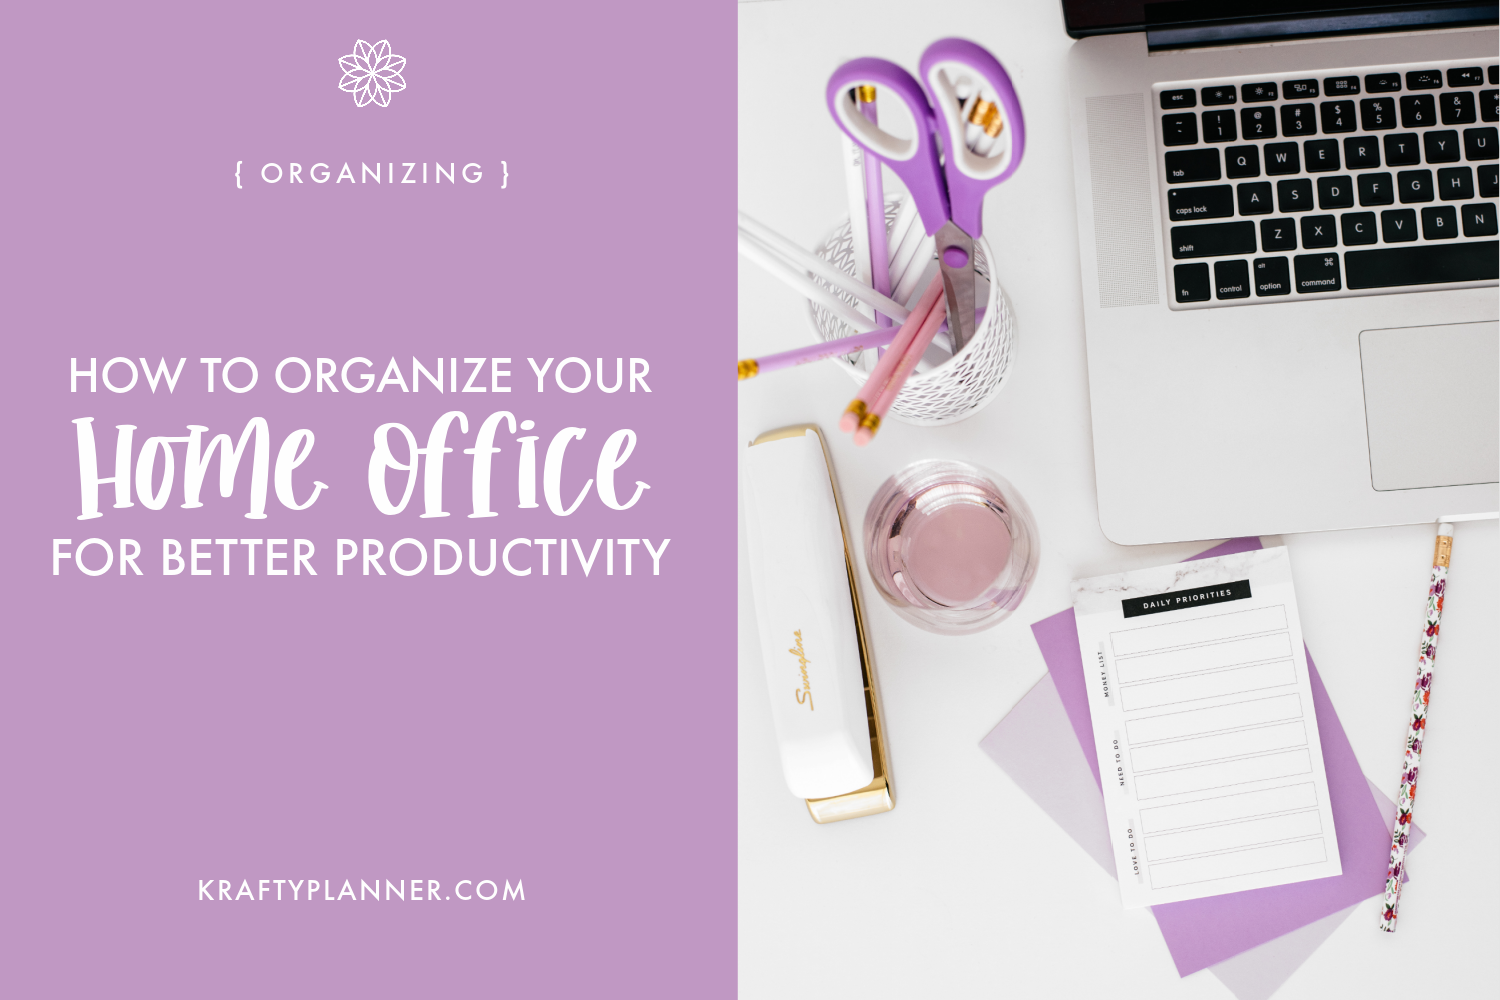 How To Organize Your Home Office For Better Productivity Main Image copy.png